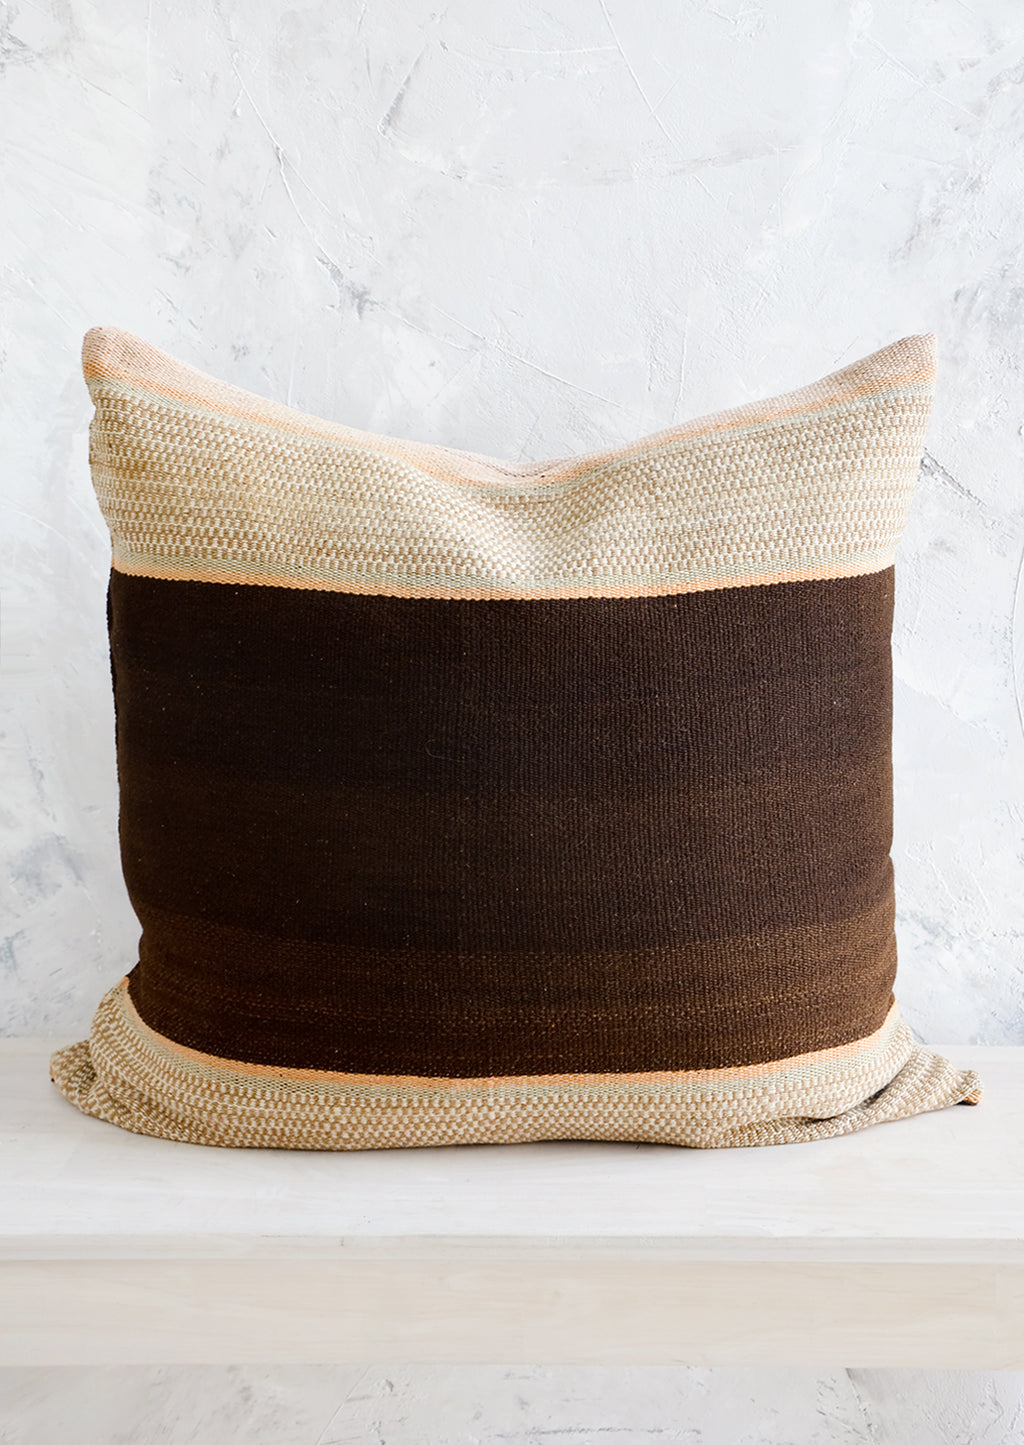 1: Throw pillow made from vintage wool fabric in brown and beige